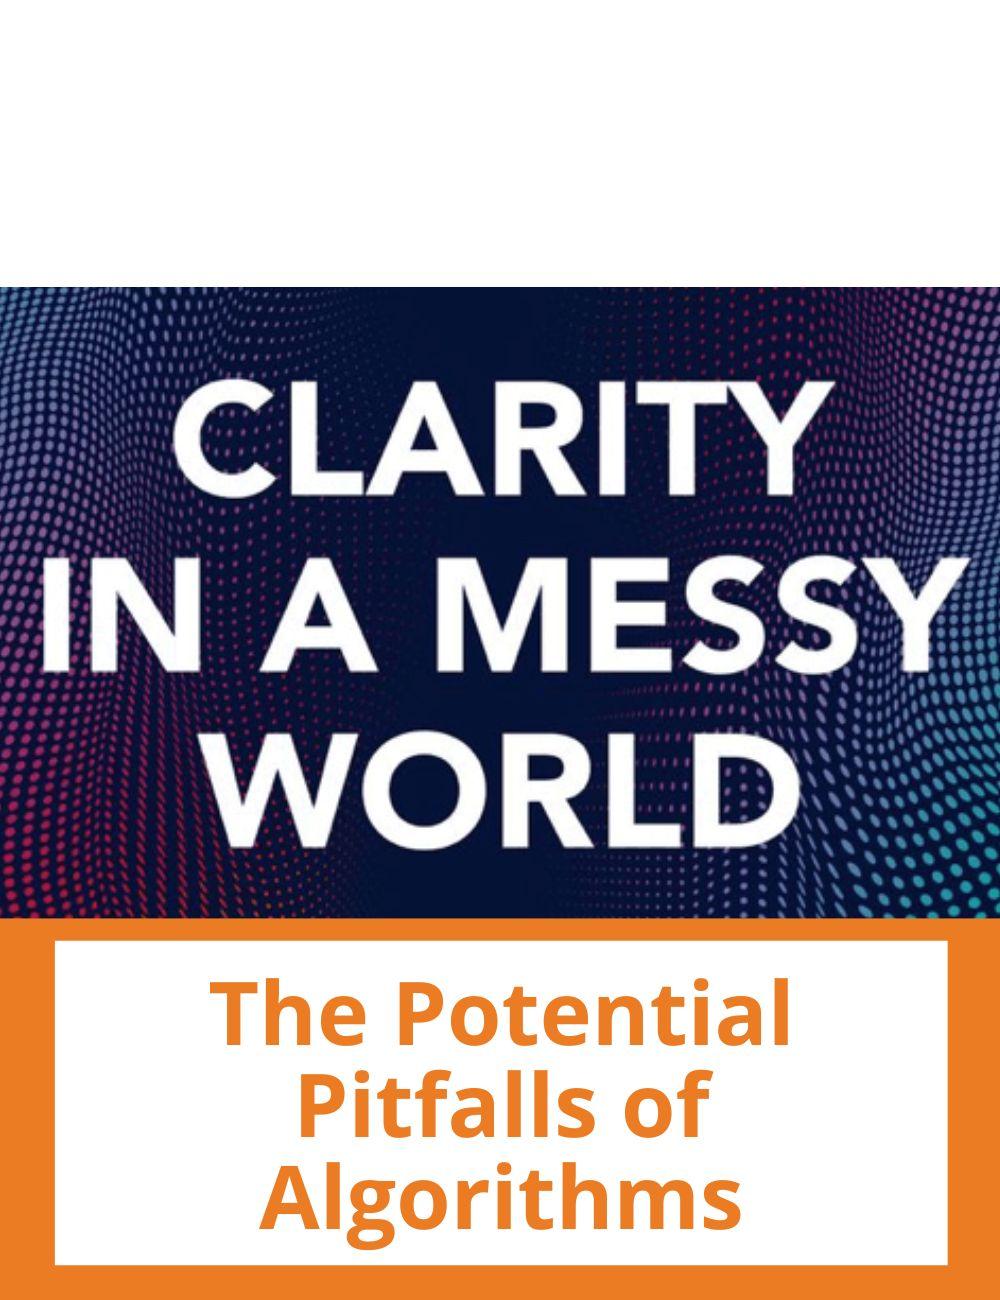 Link to related podcast. Image: cover image of the podcast Clarity in a Messy World. Podcast headline: The Potential Pitfalls of Algorithms